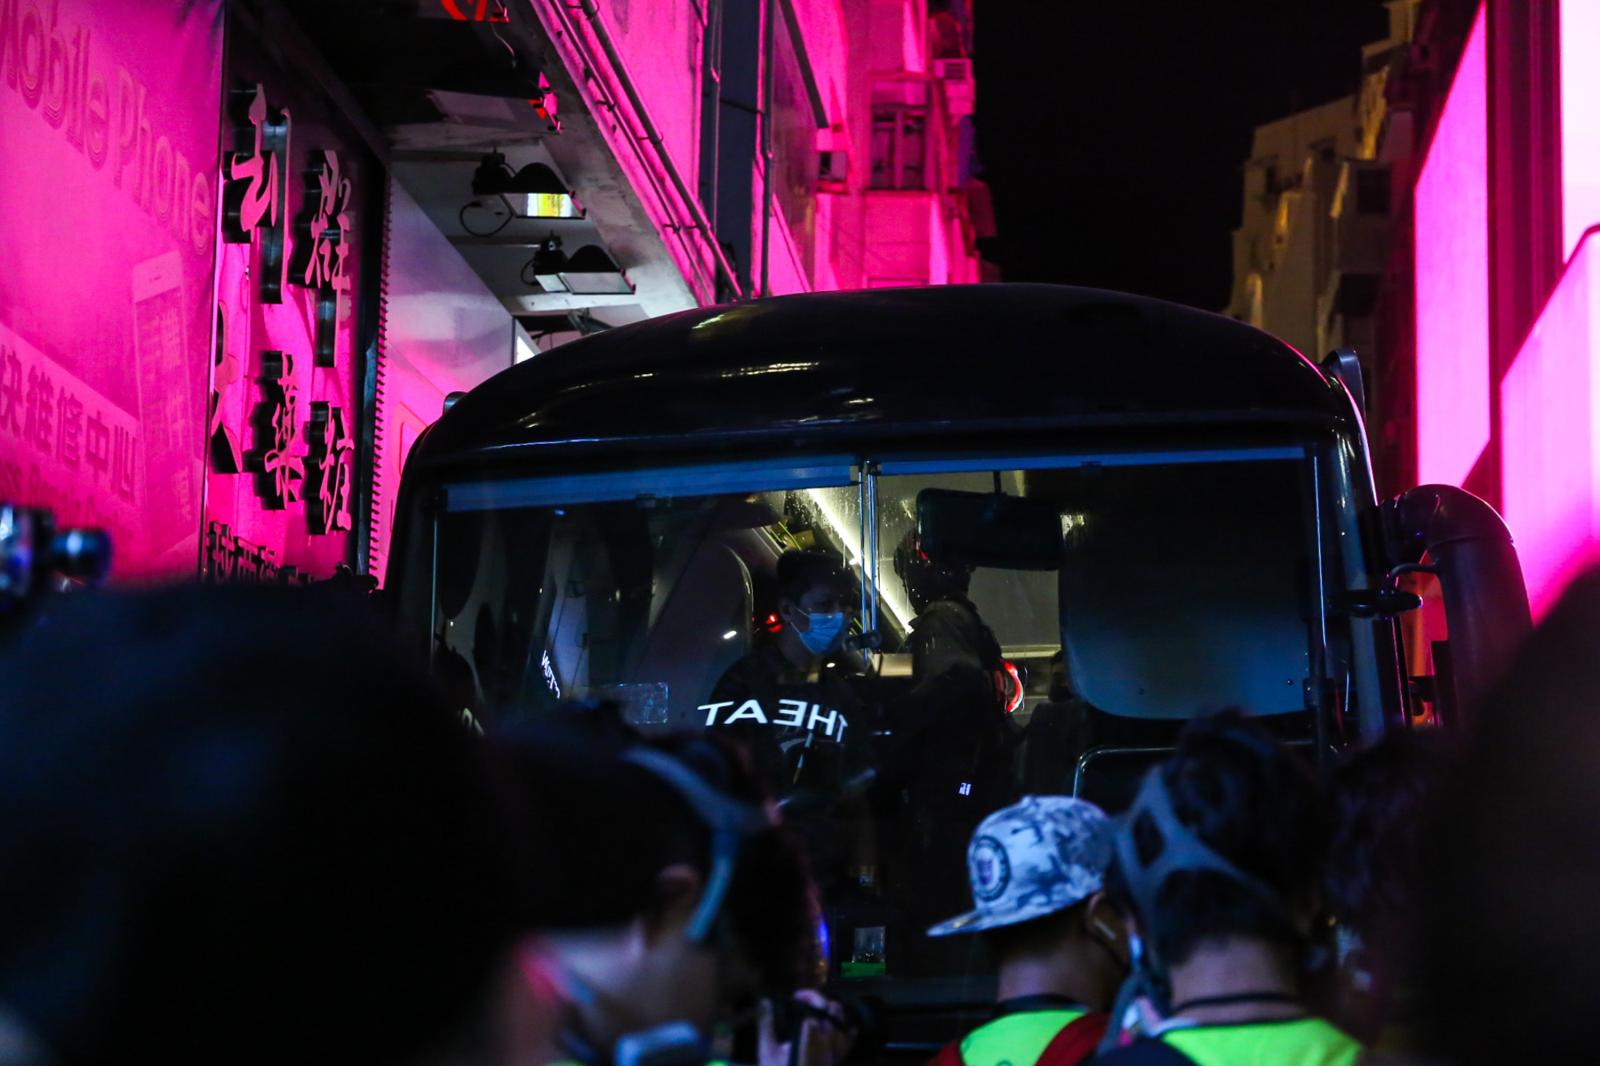 On the first day of the National Security Law in Hong Kong, thousands took to the streets in defiance. Leading up to the nighttime, police can be seen leading arrested protestors onto a bus, who will be transferred to a police station later on. Since the passing of the NSL in July 2020, 93 individuals have been arrested under this piece of legislation, which punishes acts of secession, subversion, foreign interference, and terrorism with up to life imprisonment. In the most dramatic act yet, 53 individuals who had participated in unofficial democratic primaries months earlier were arrested in a single day.